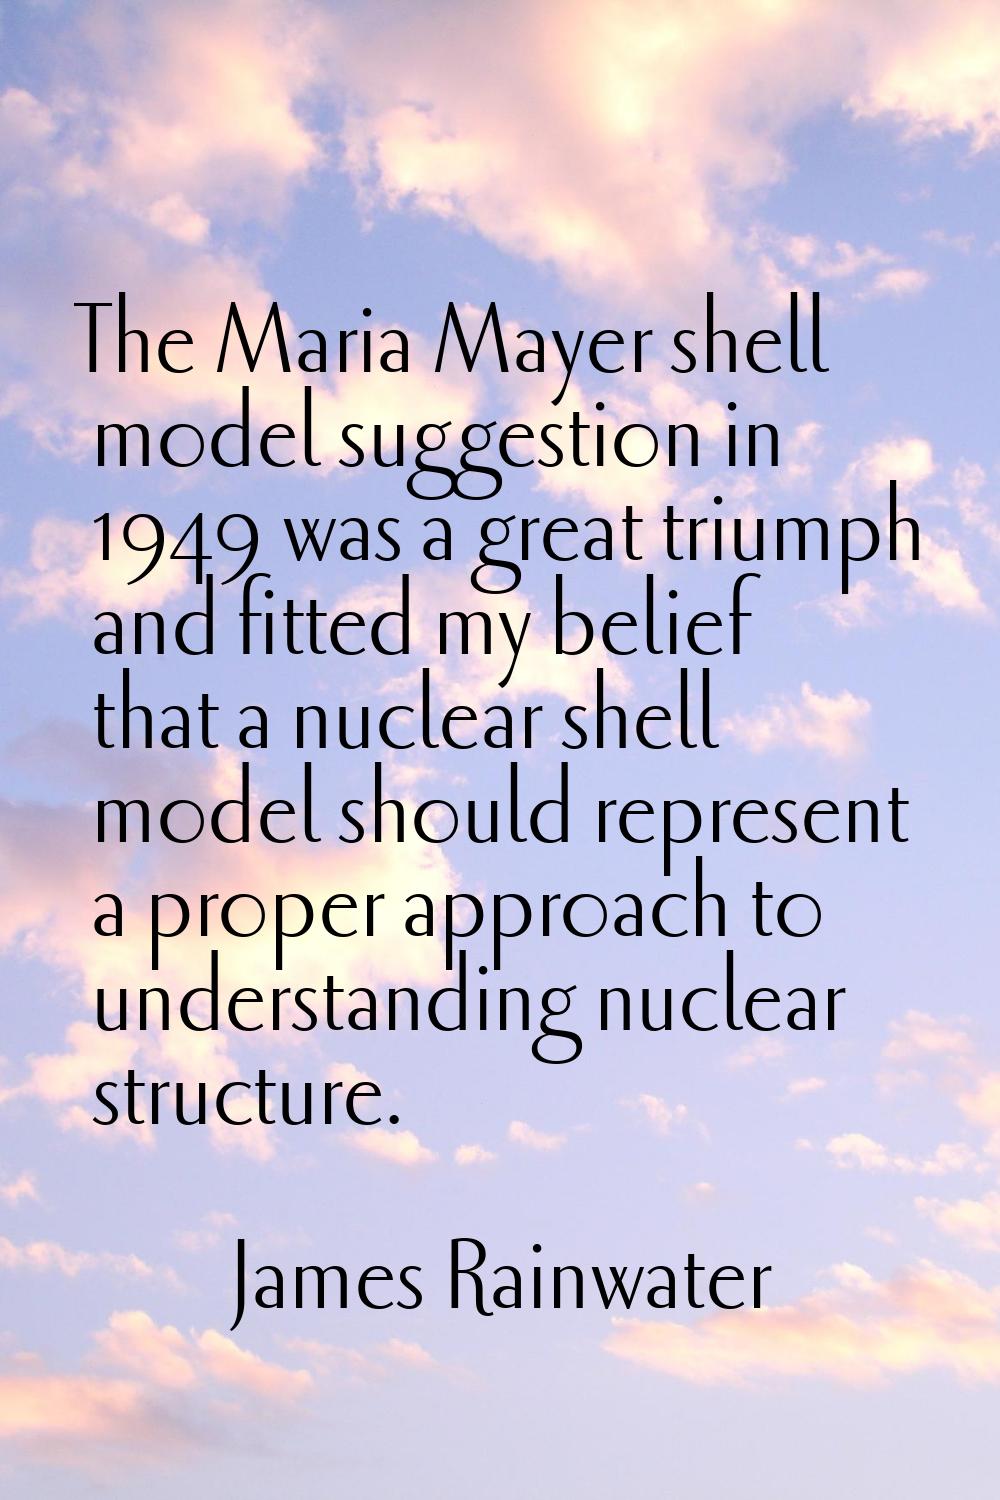 The Maria Mayer shell model suggestion in 1949 was a great triumph and fitted my belief that a nucl